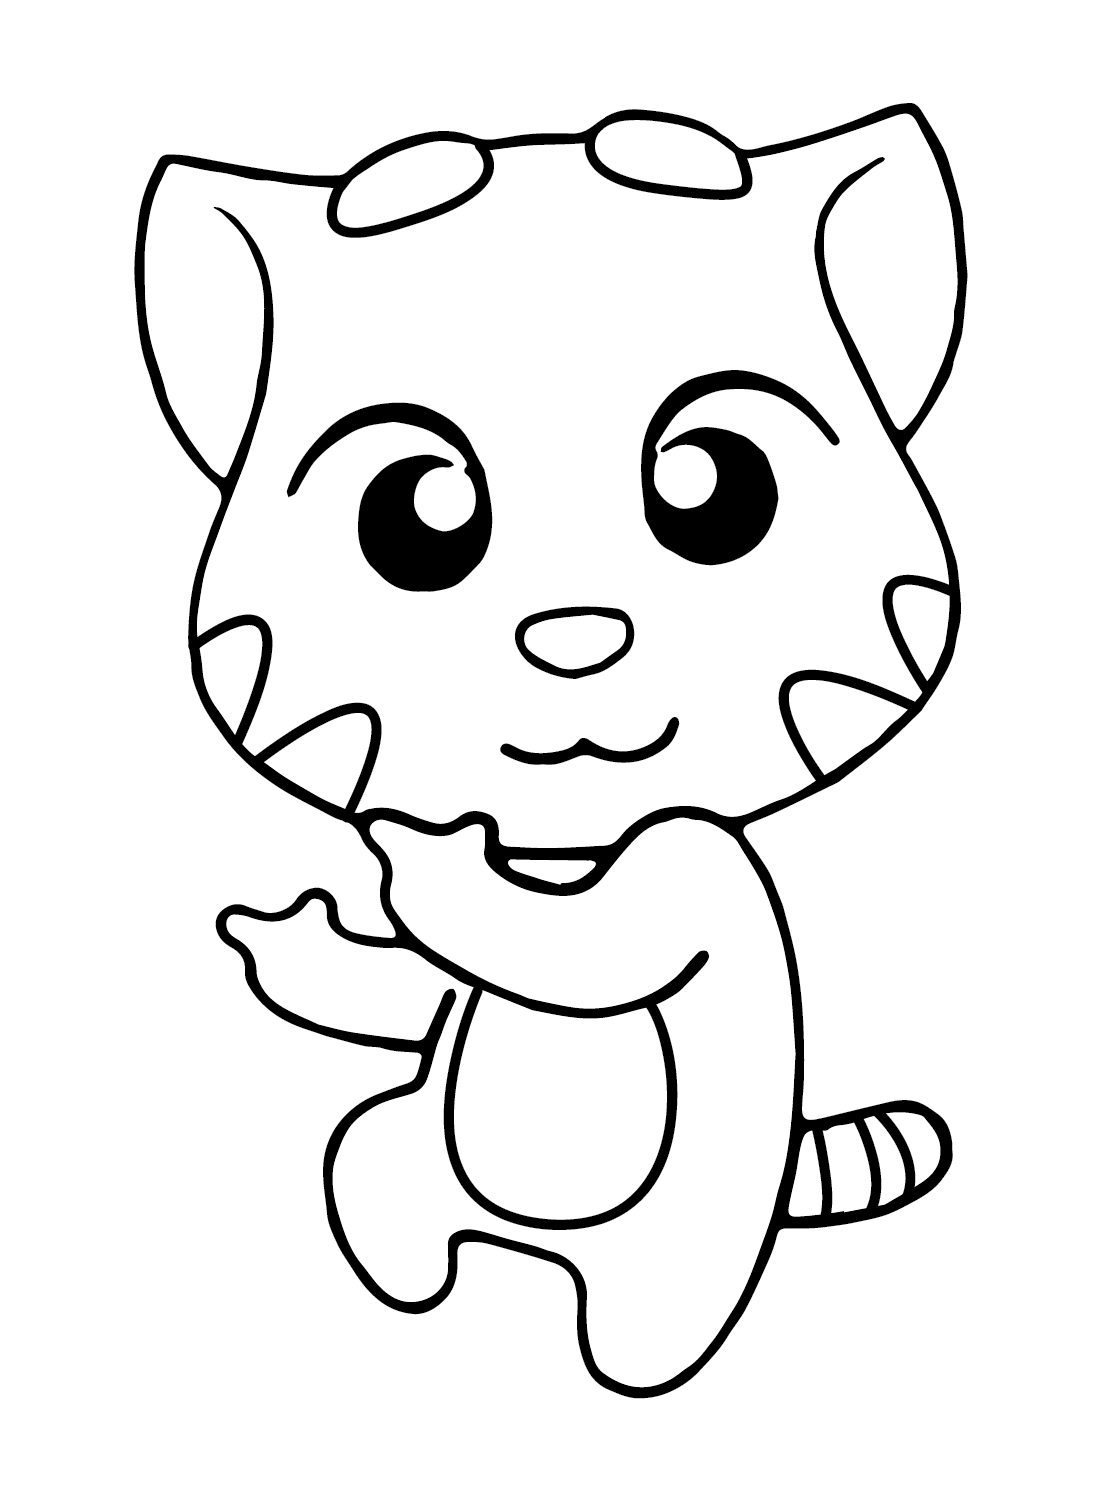 Talking Ben Coloring Pages Printable for Free Download